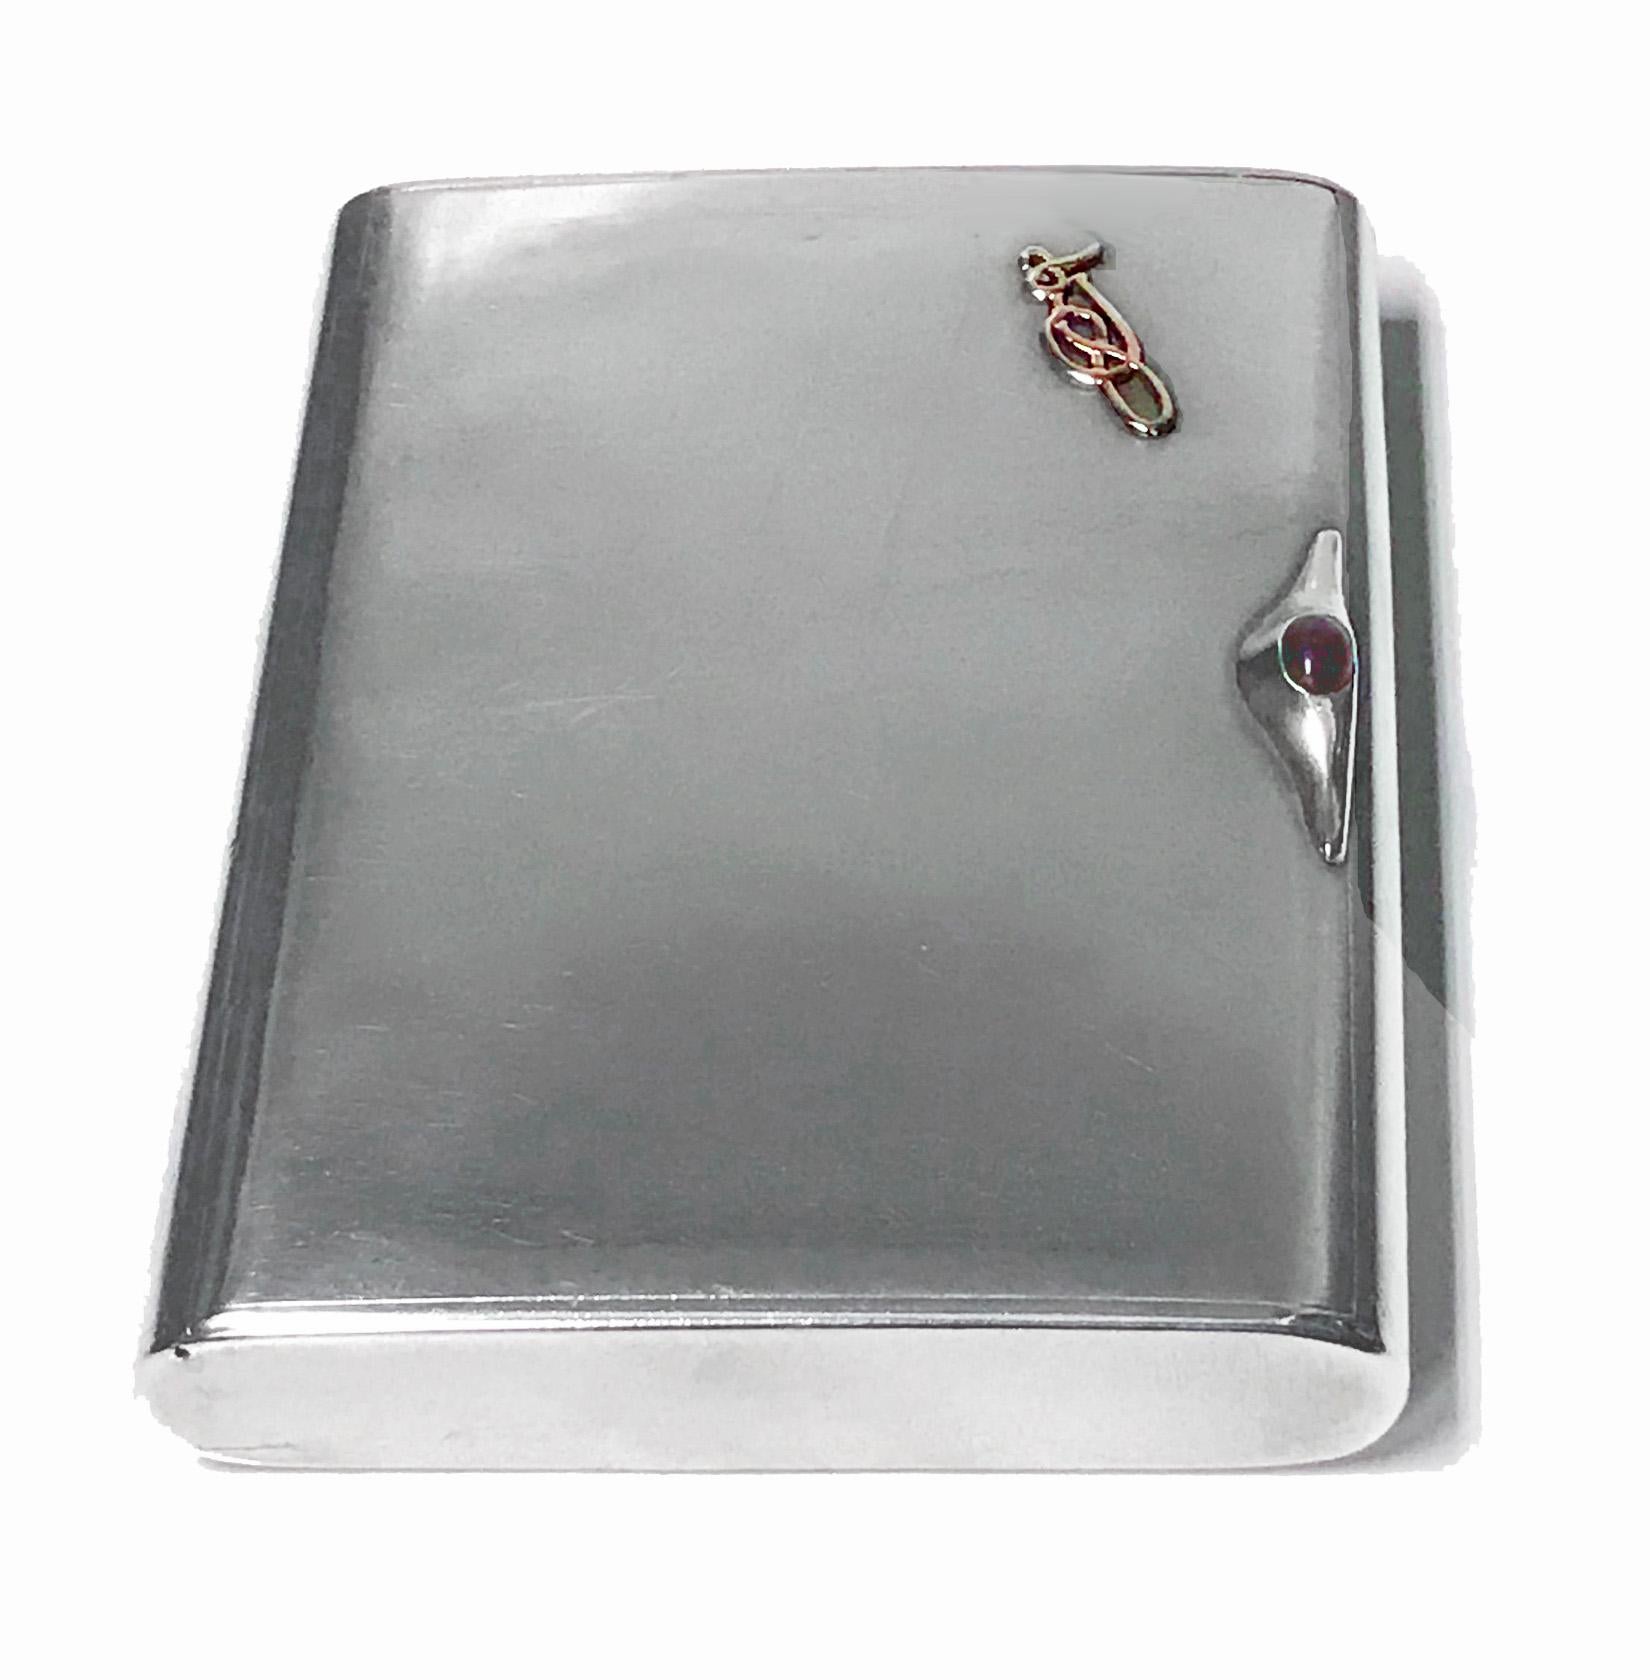 Art Deco Silver Cigarette Case Box, Estonia C.1925. Plain, flush hinge, cabochon red garnet thumb piece,gilded interior. No monograms, gold (tested) intertwined nouveau celtic insignia applied at one cornice, original patina, extremely light wear,